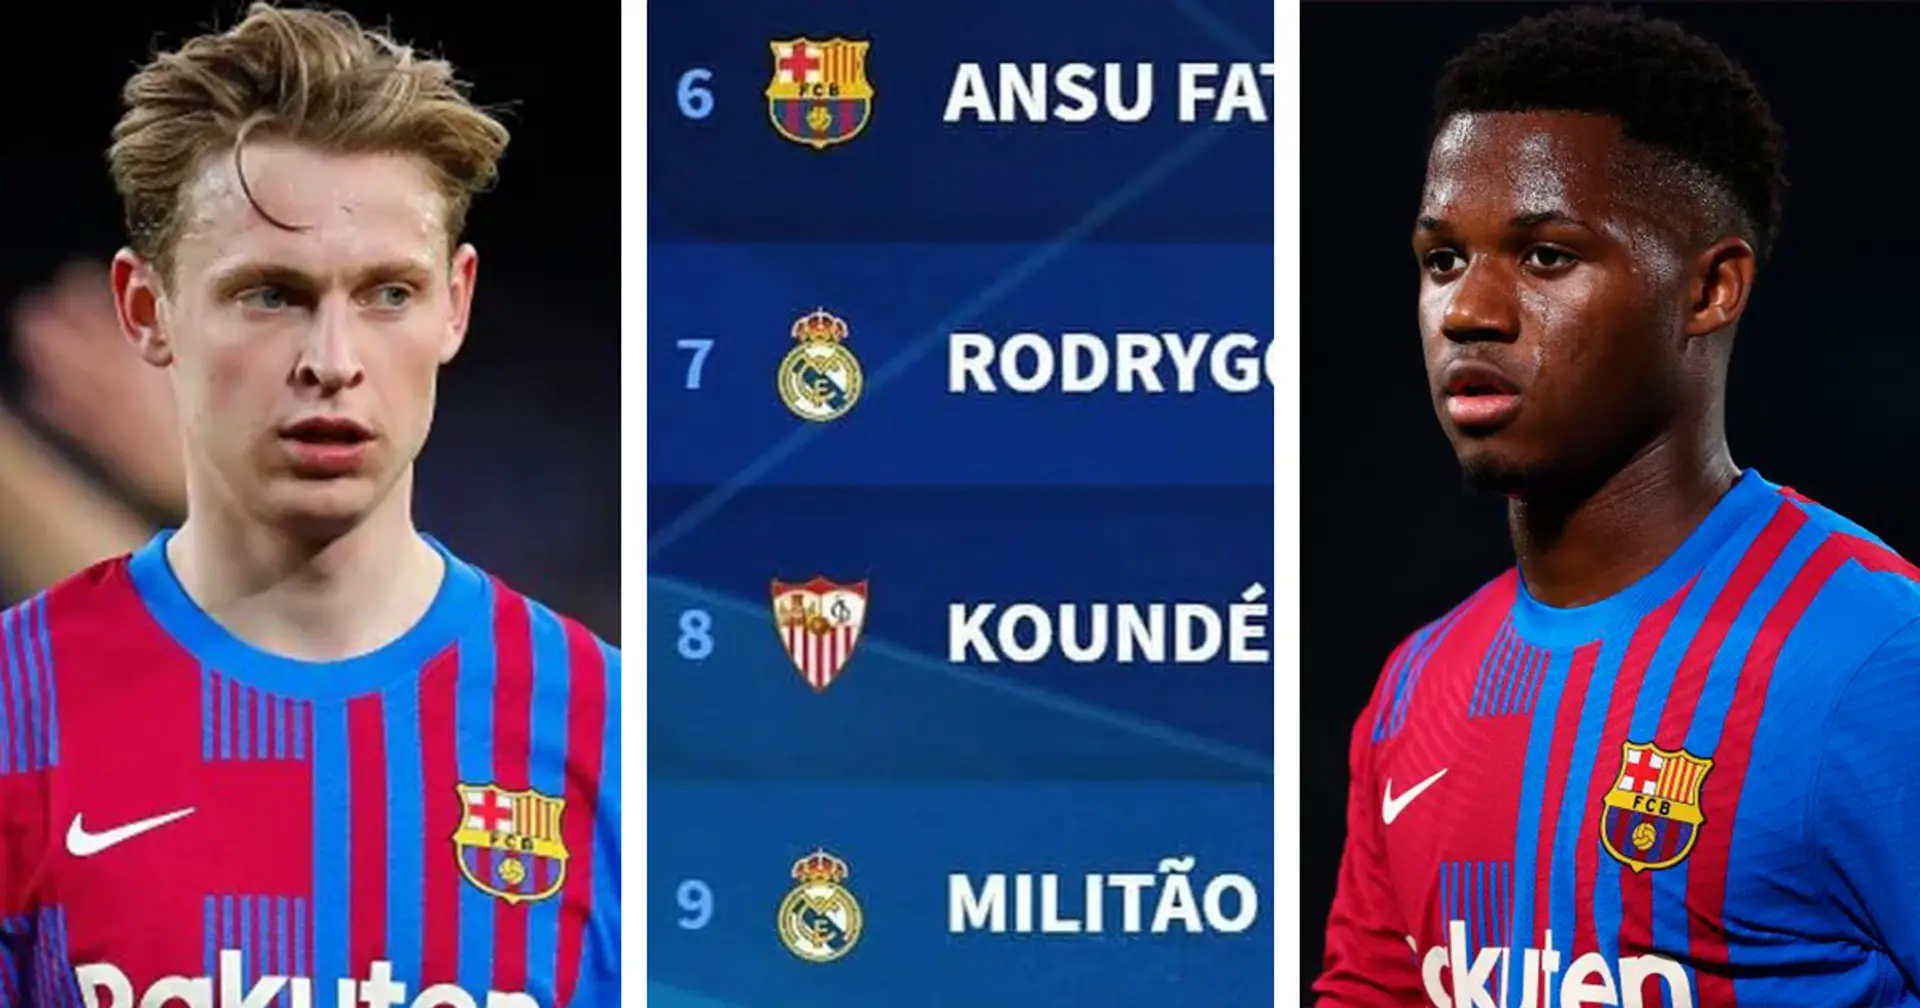 No Araujo, one Barca player in top 3: Most valuable La Liga players right now